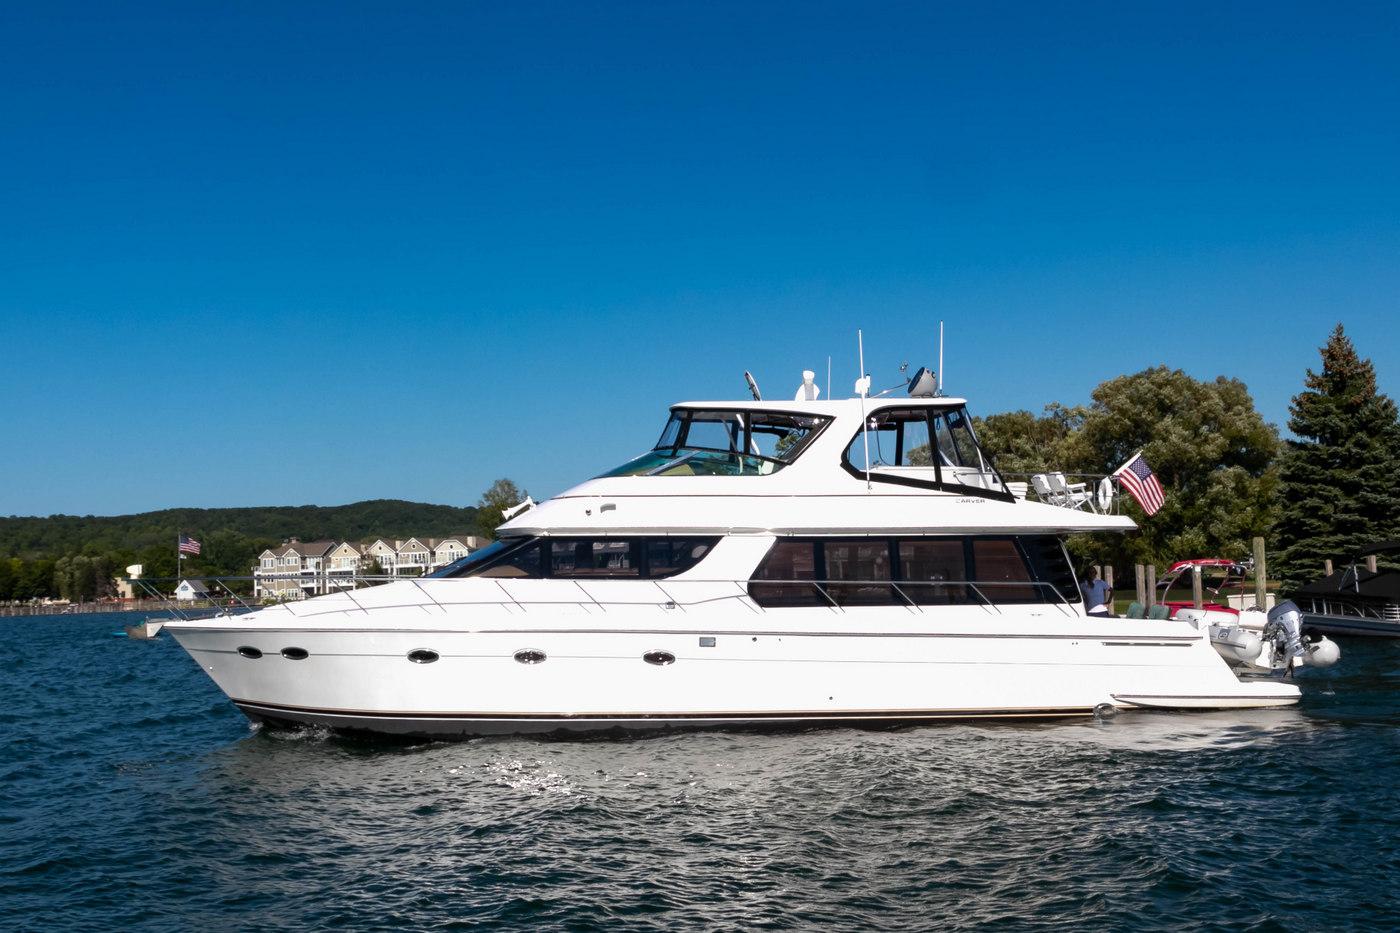 carver yachts for sale michigan